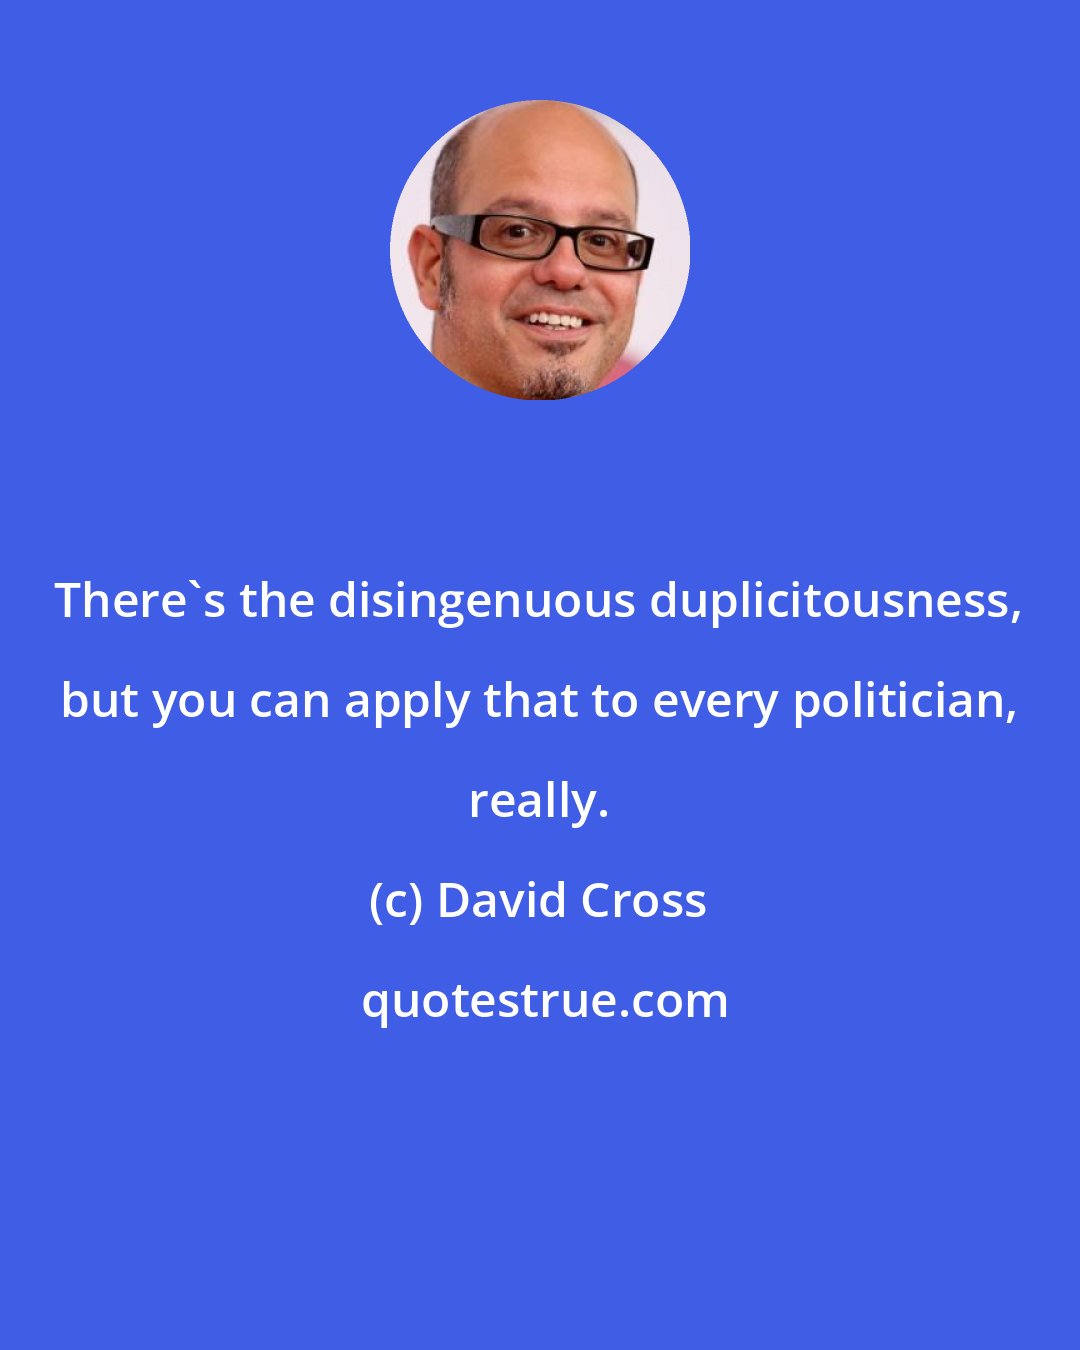 David Cross: There's the disingenuous duplicitousness, but you can apply that to every politician, really.